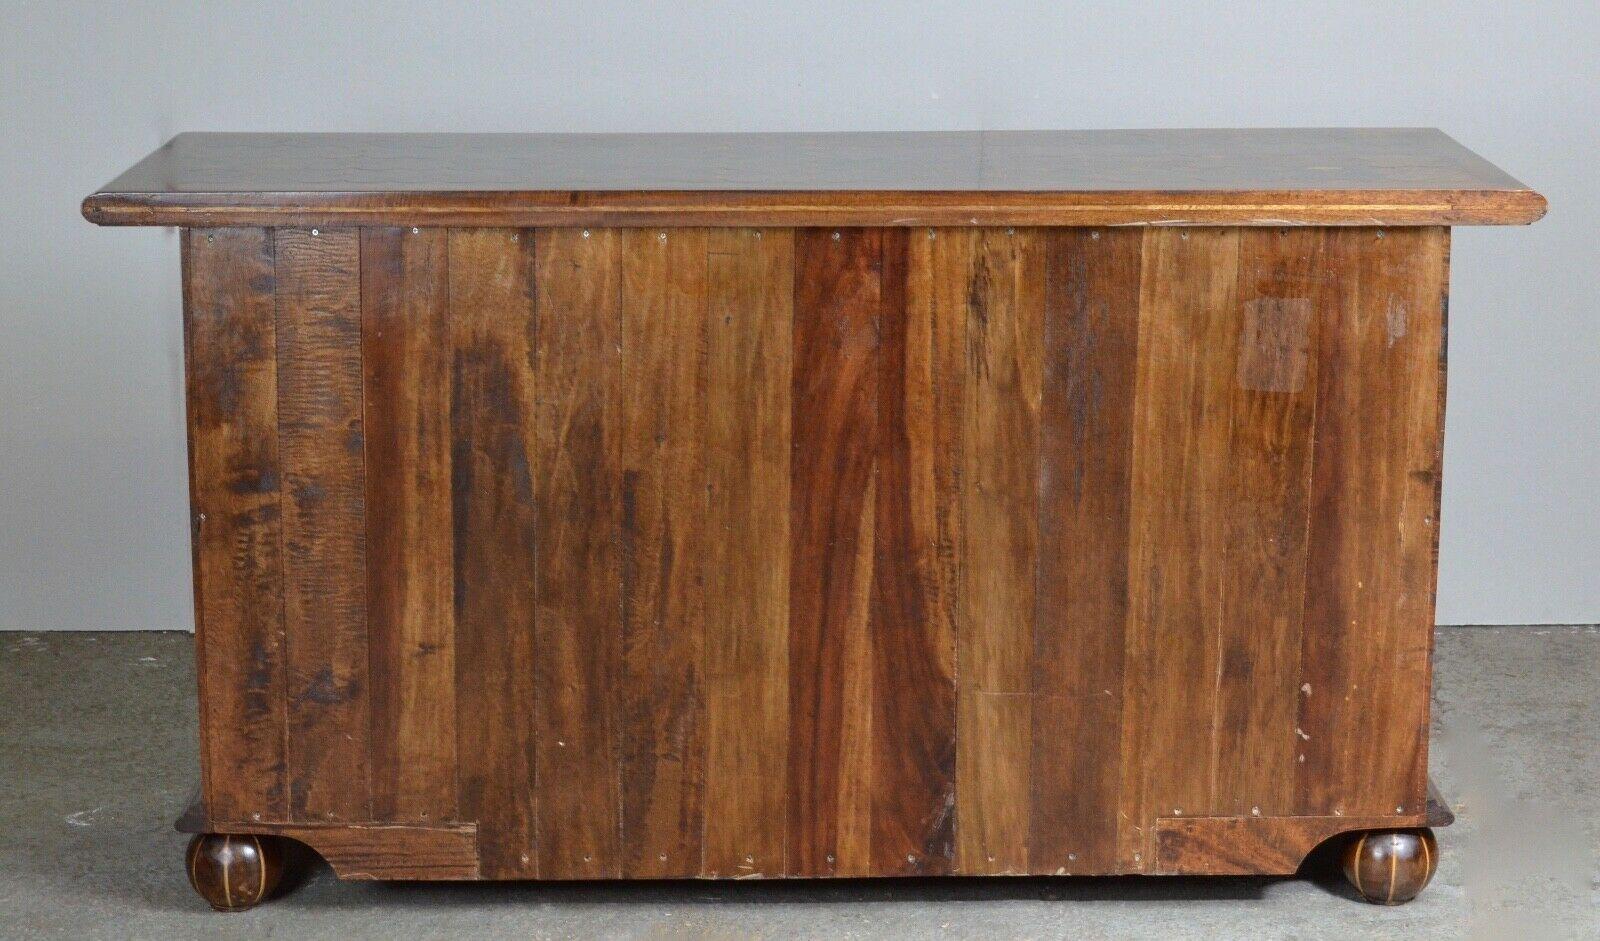 English Quality Antique Walnut Parquetry Inlaid Hardwood Sideboard /Table&Ch Available For Sale